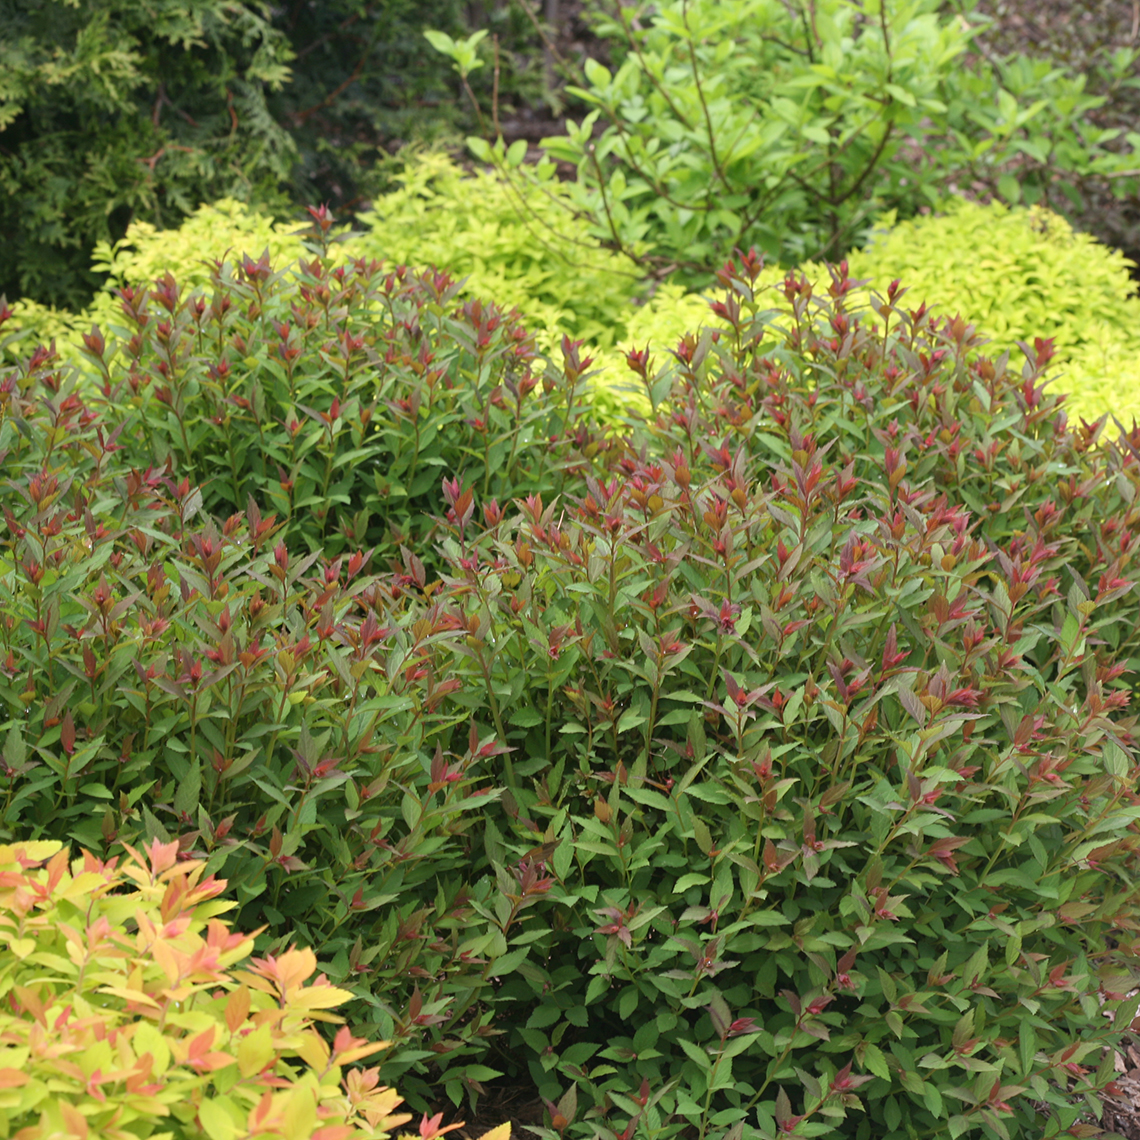 Mass planting of Double Play Artisan Spiraea tipped with red new growth